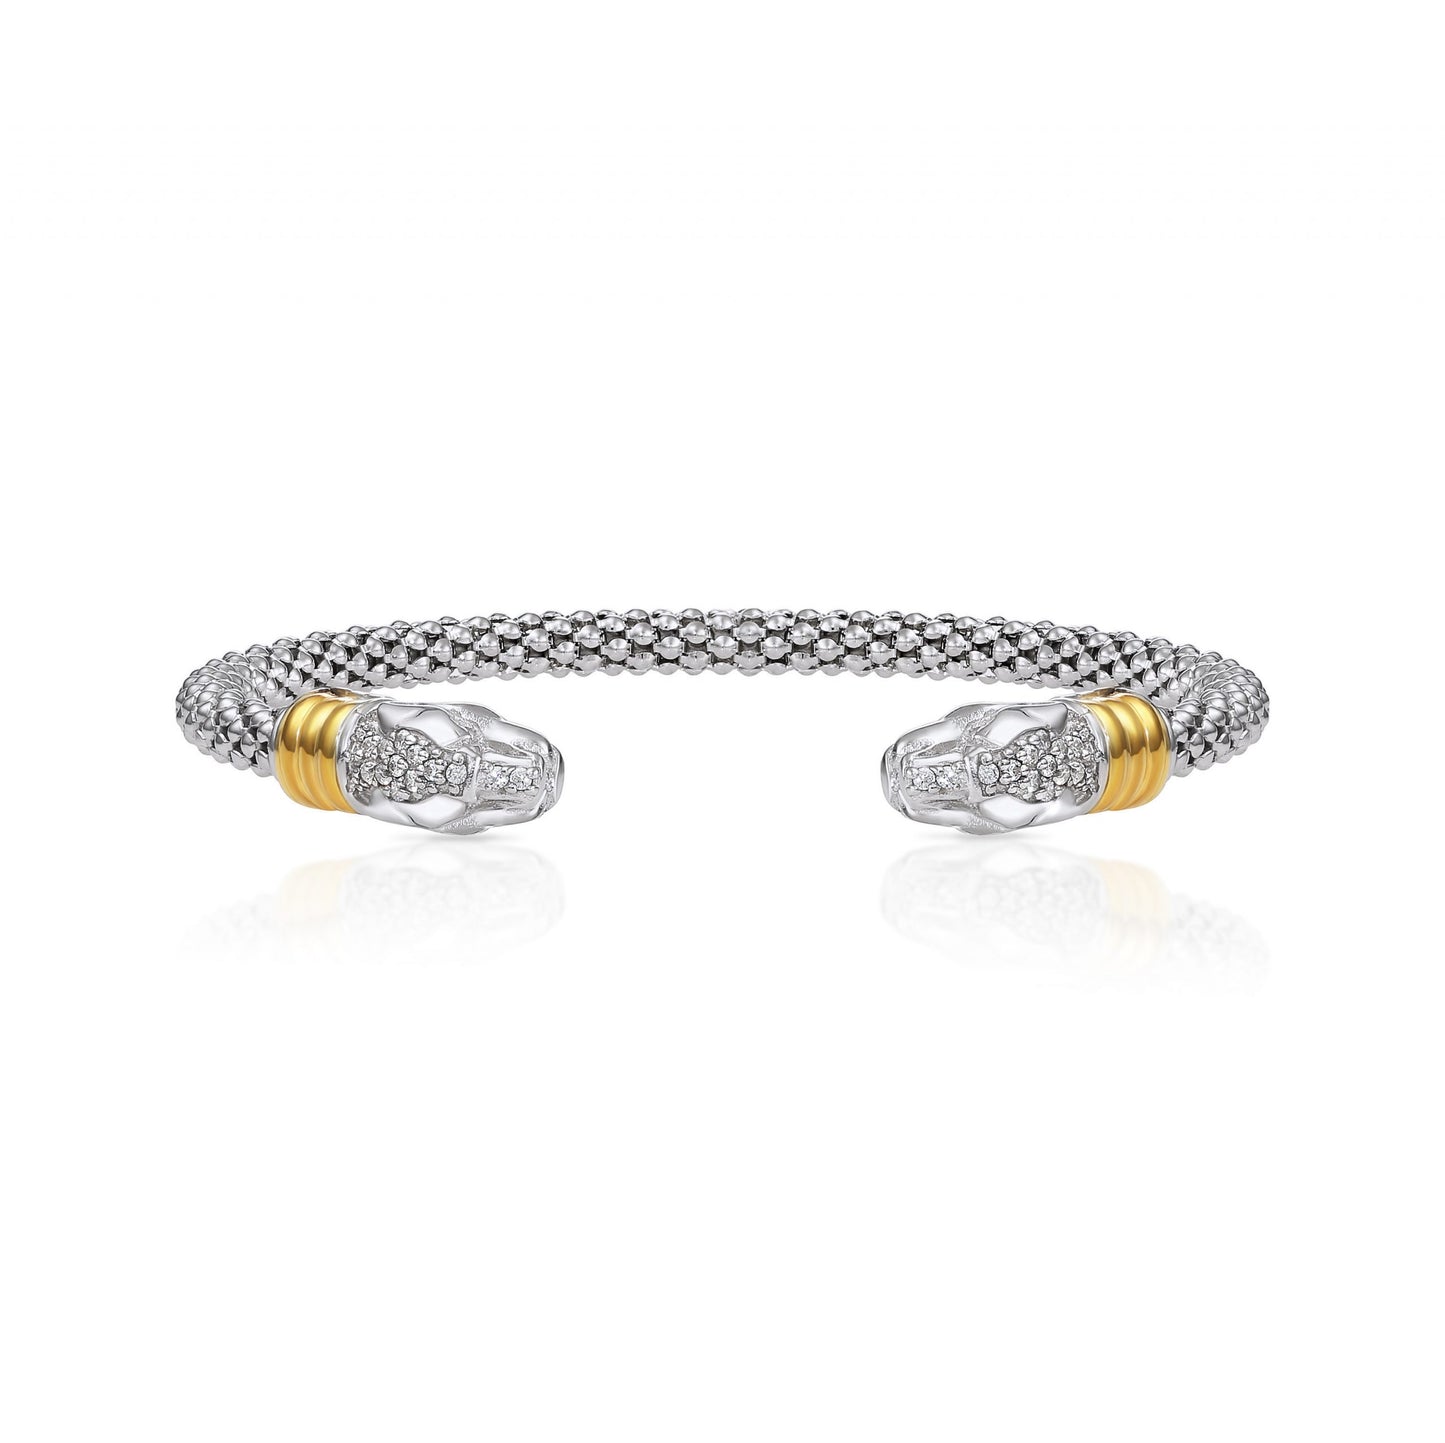 Jaguar Cuff Bracelet in Sterling Silver, Slip On Bangle with Gold Accents, Fits 6 and 7 inch wrist